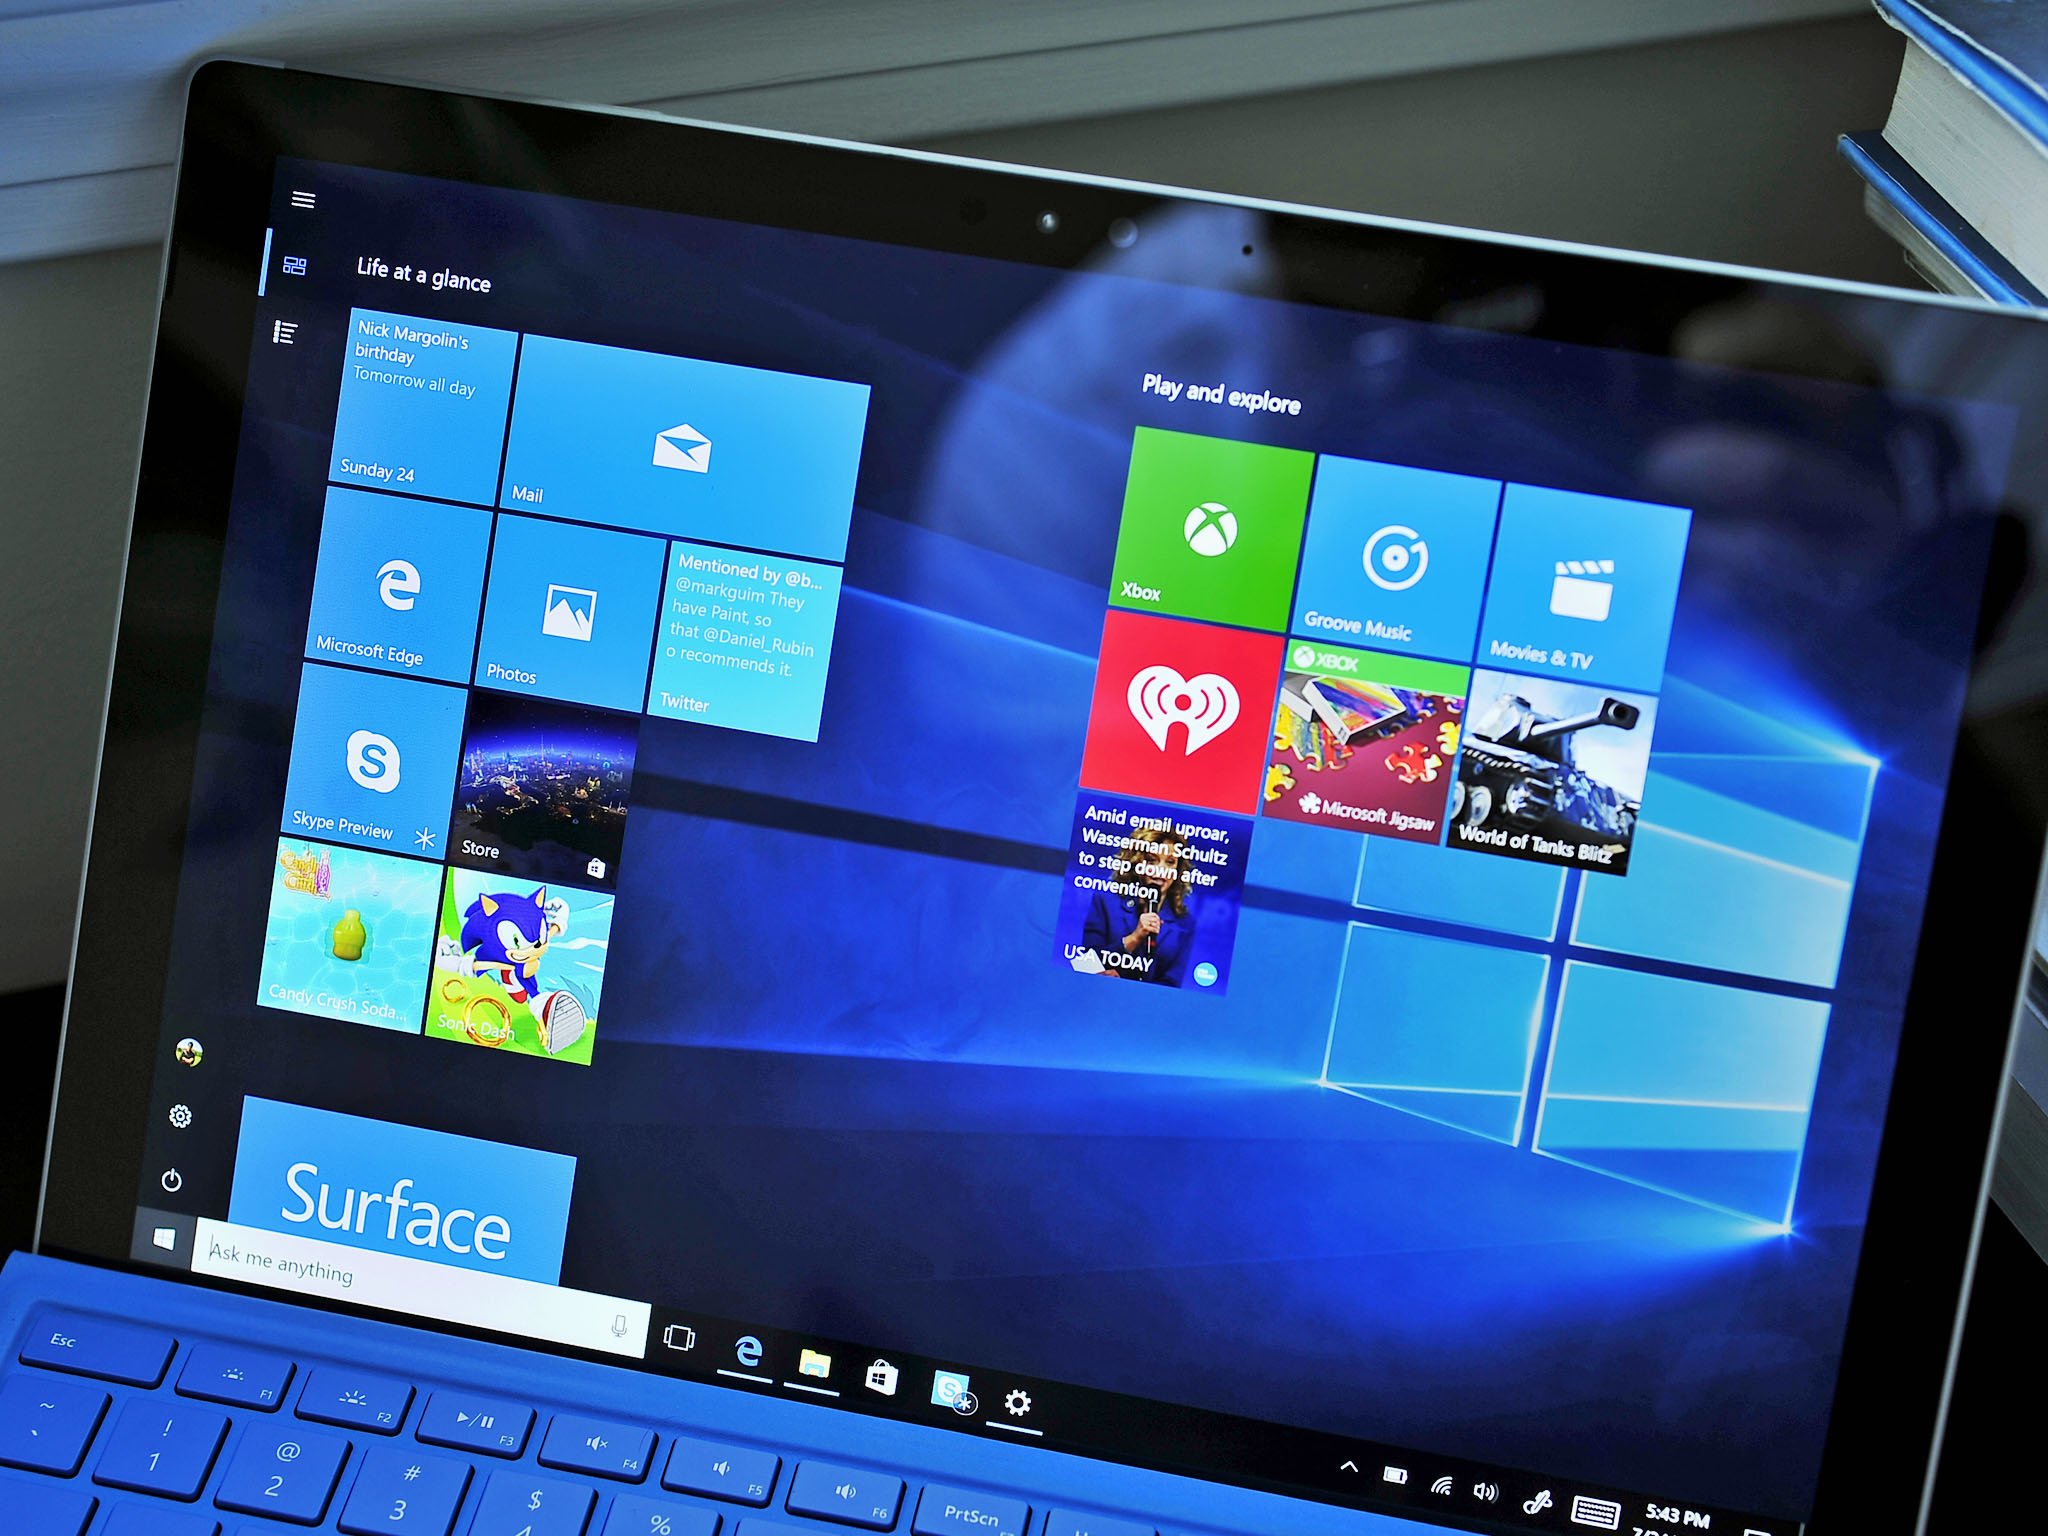 Microsoft ends support for Windows 10 for PC version 1511